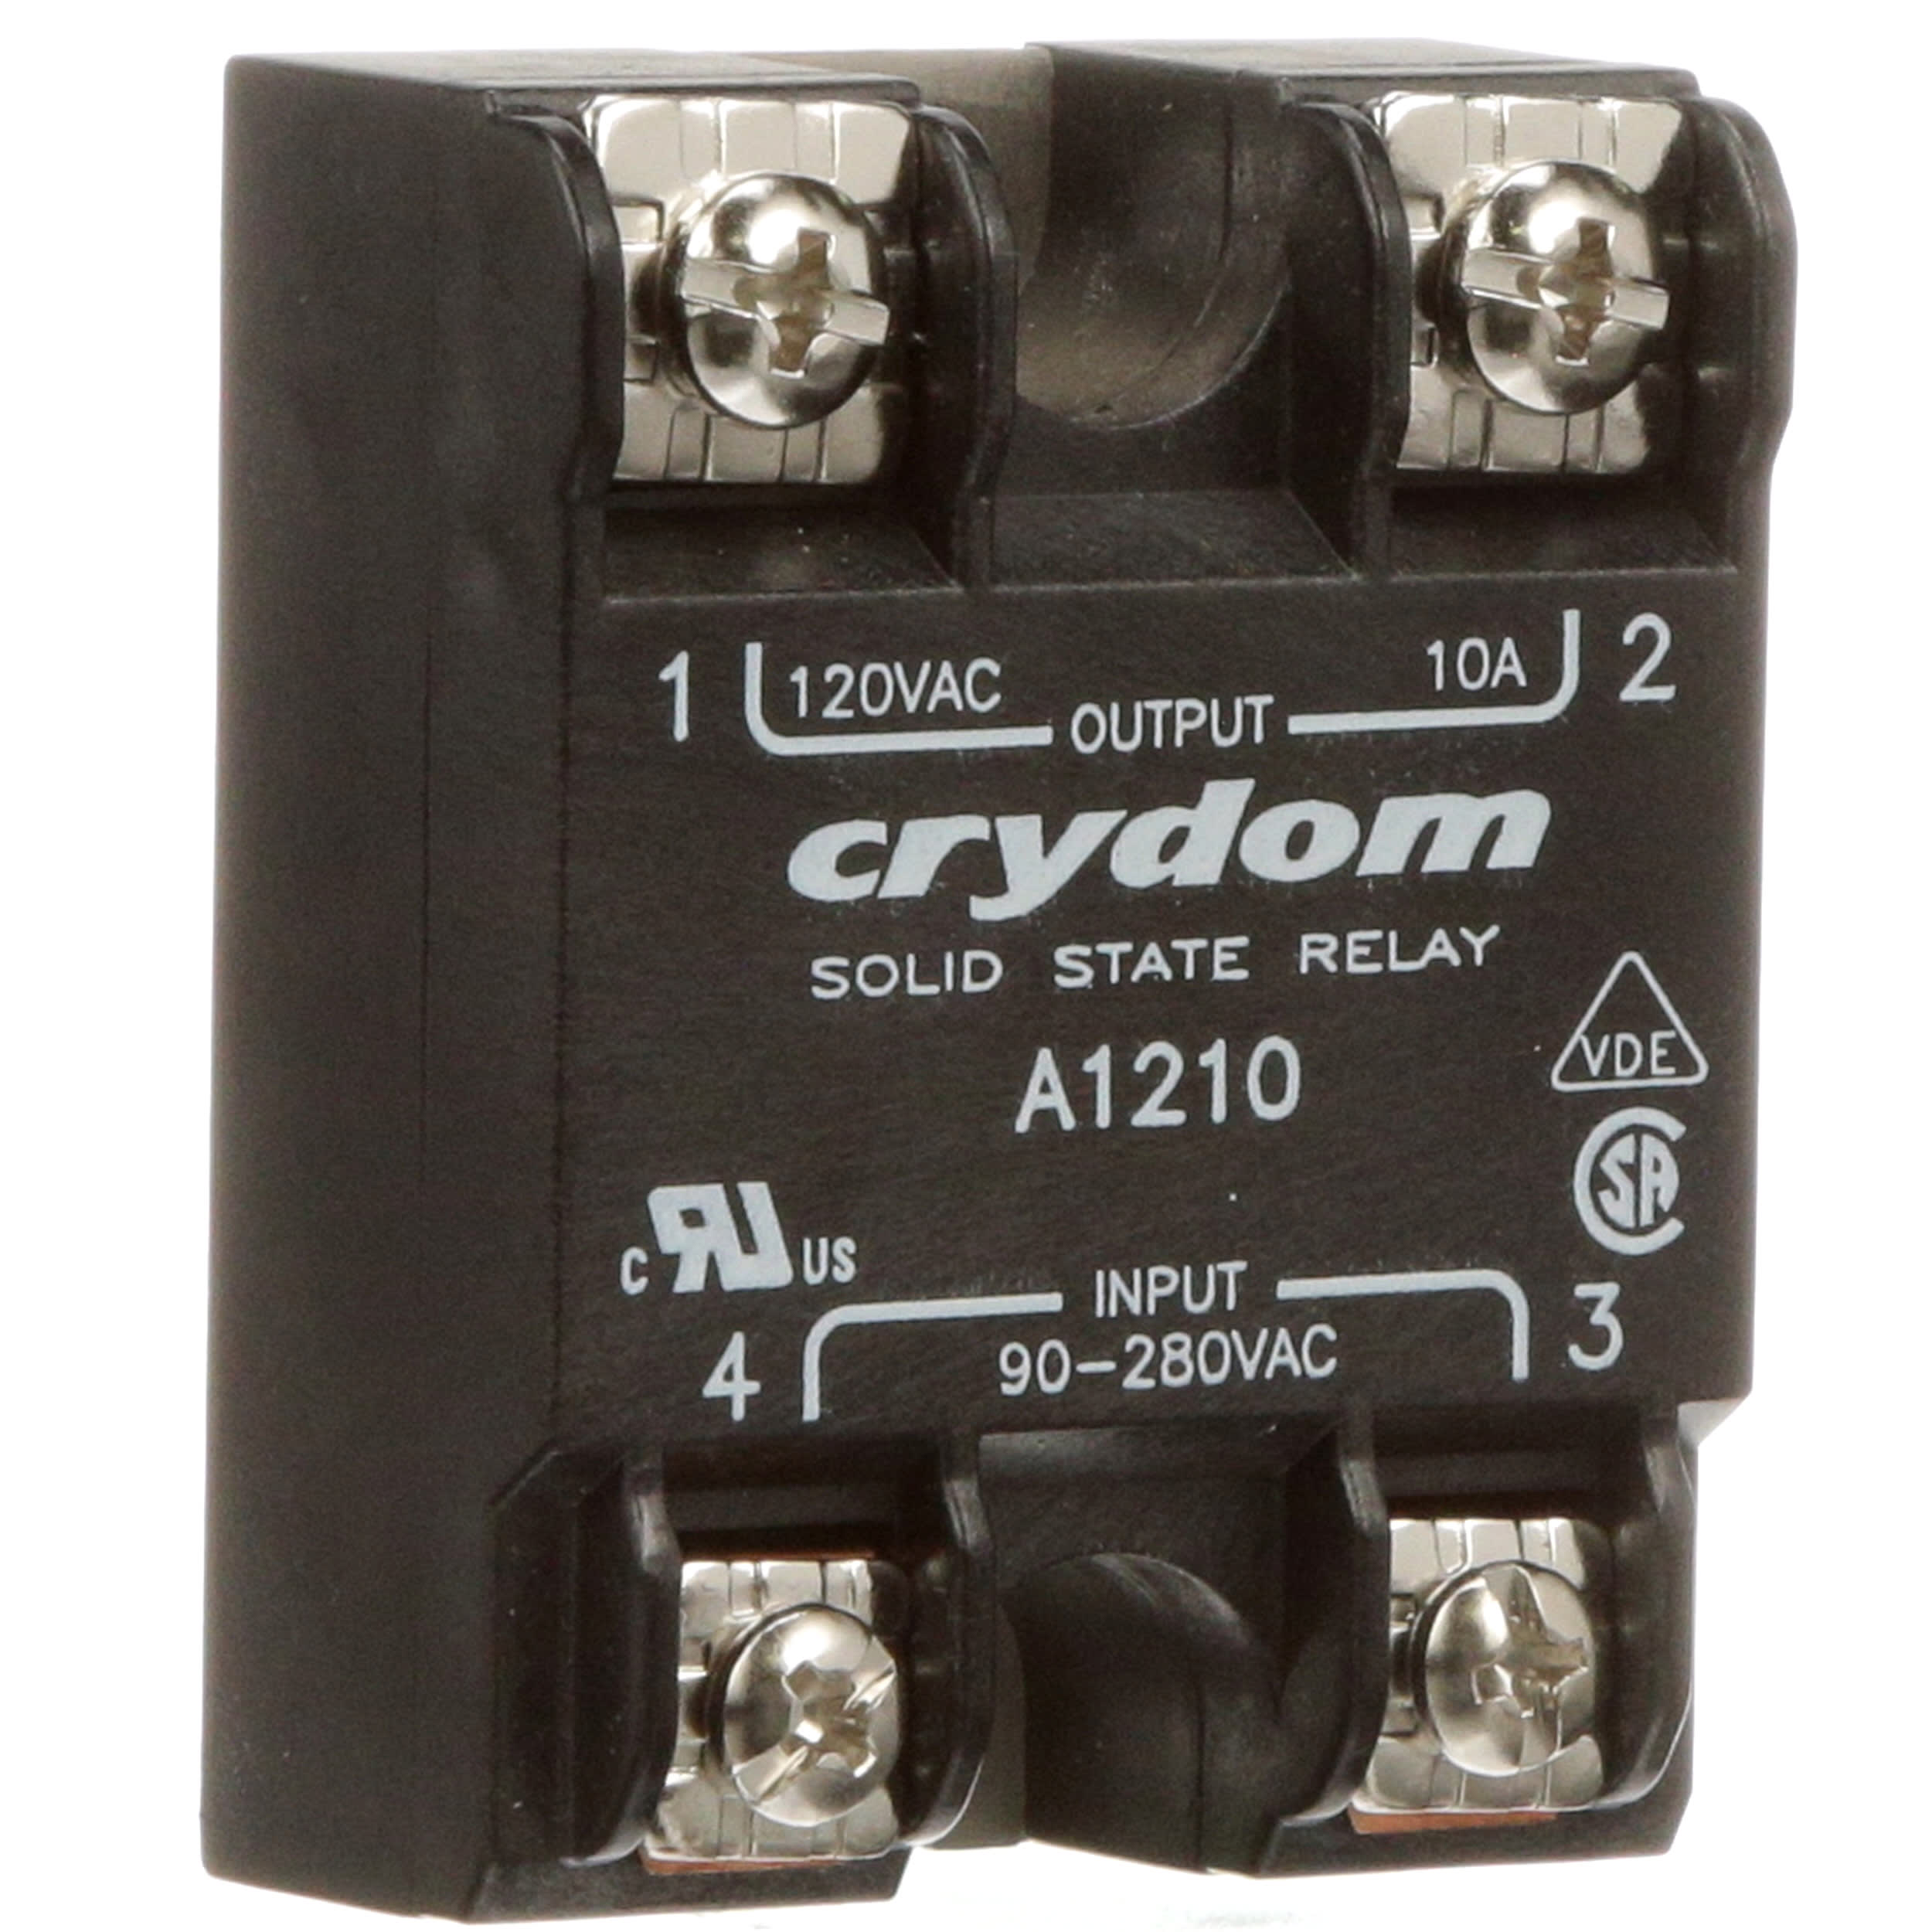 CRYDOM SOLID STATE RELAY # TD1210 